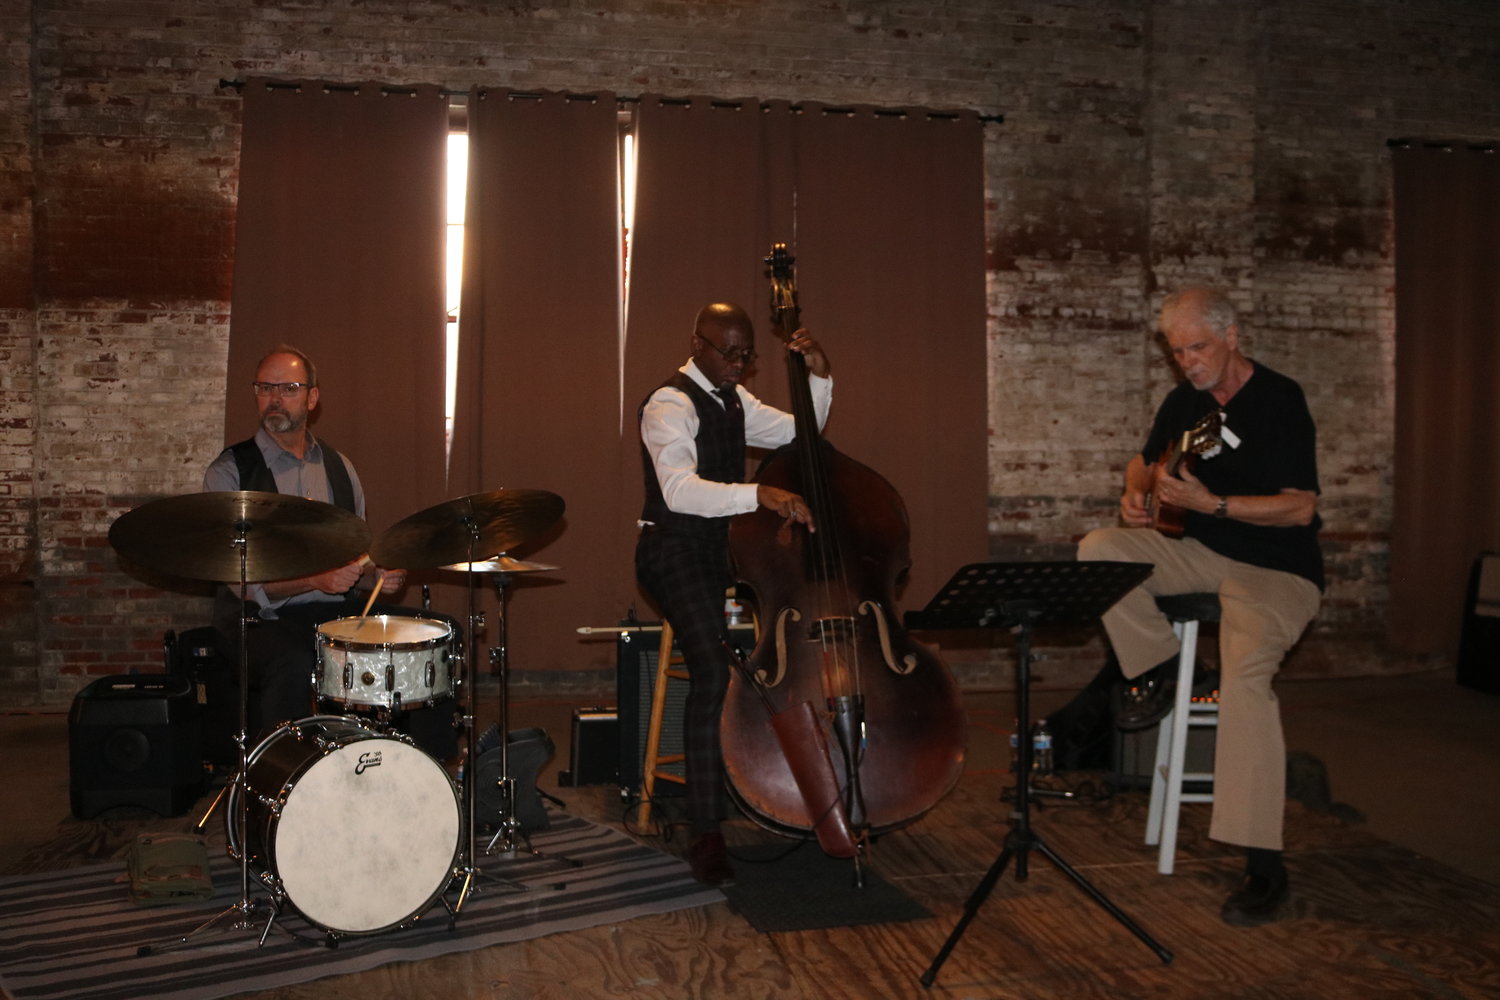 Live music was part of the entertainment at the 38th Annual Caring Chefs.